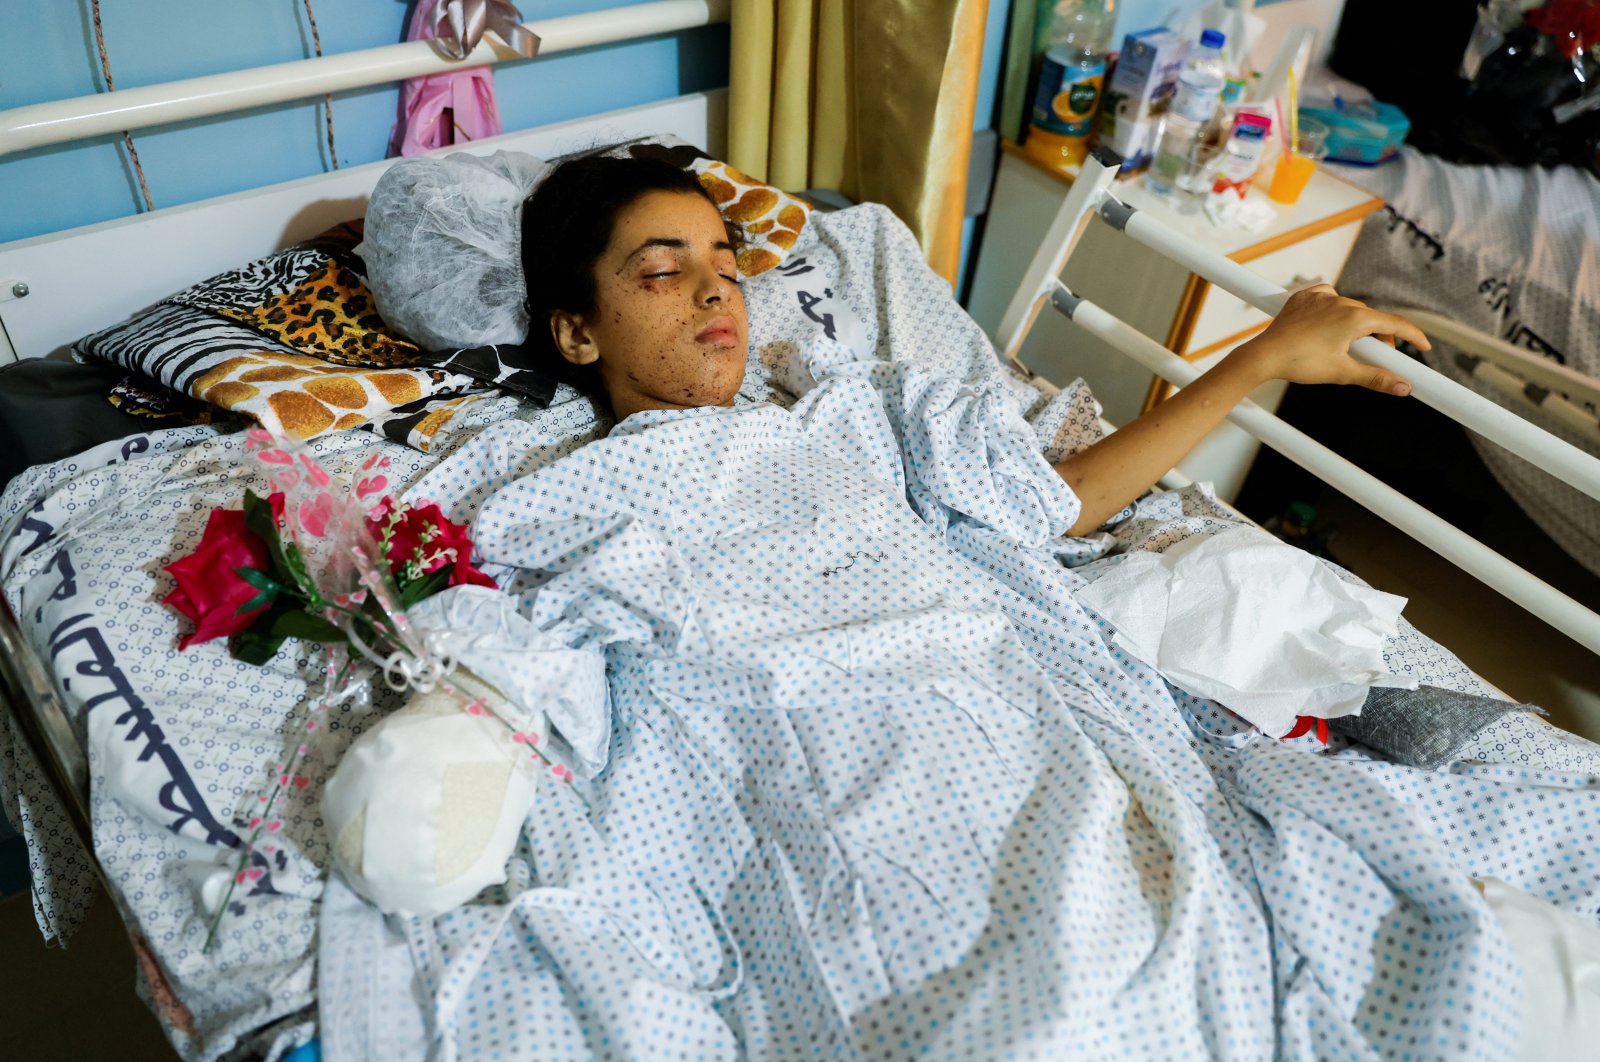 Wounded Palestinian girl Rahaf Salman, 11, who lost her limbs after an Israeli strike, looks on as she lies on a hospital bed, as cease-fire holds, in the northern Gaza Strip Aug. 9, 2022. (Reuters Photo)